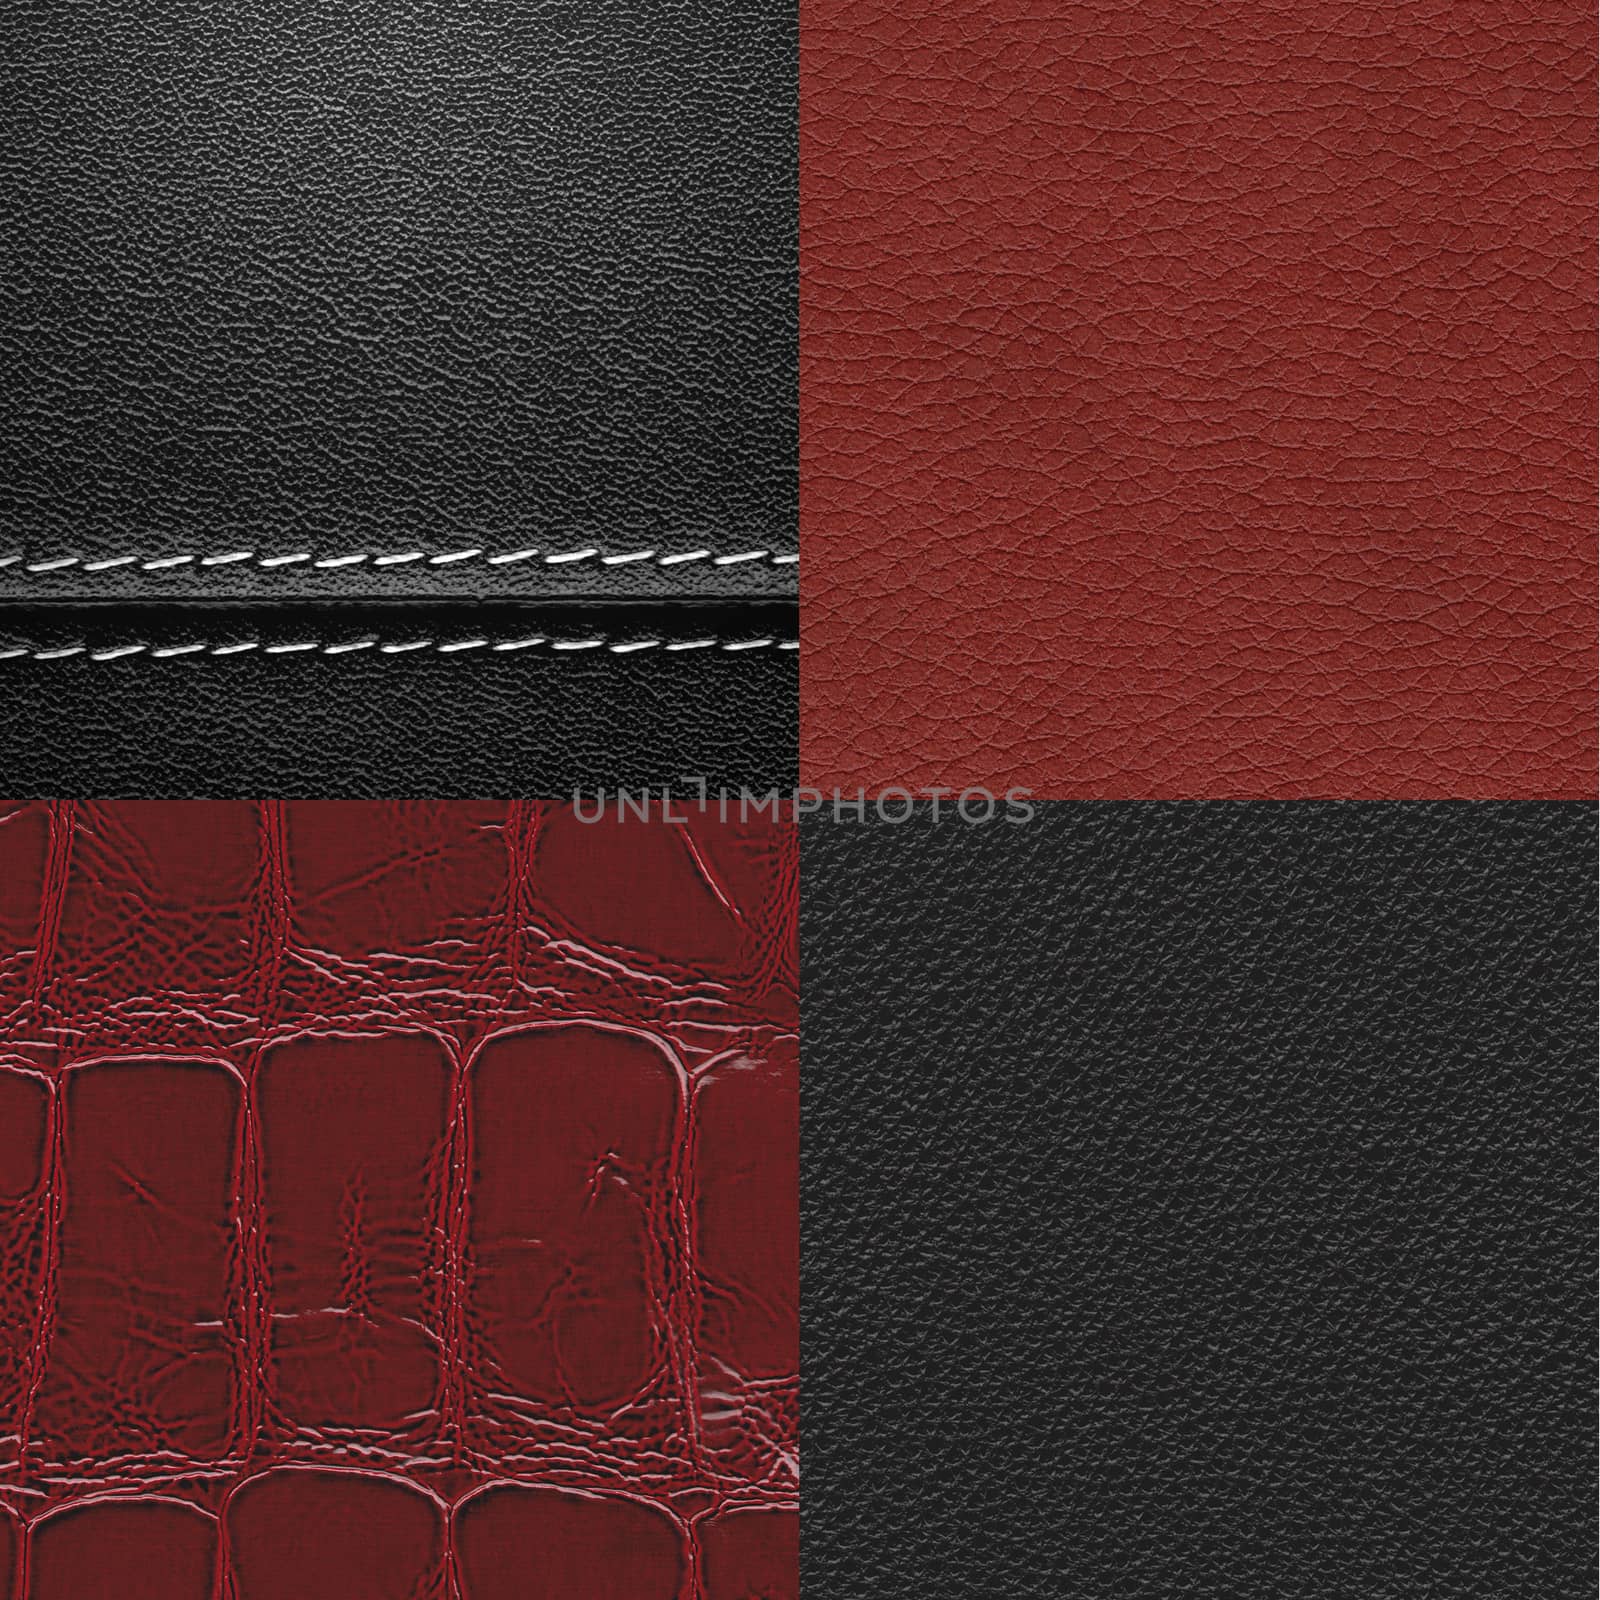 Leather texture backgrounds set by day908